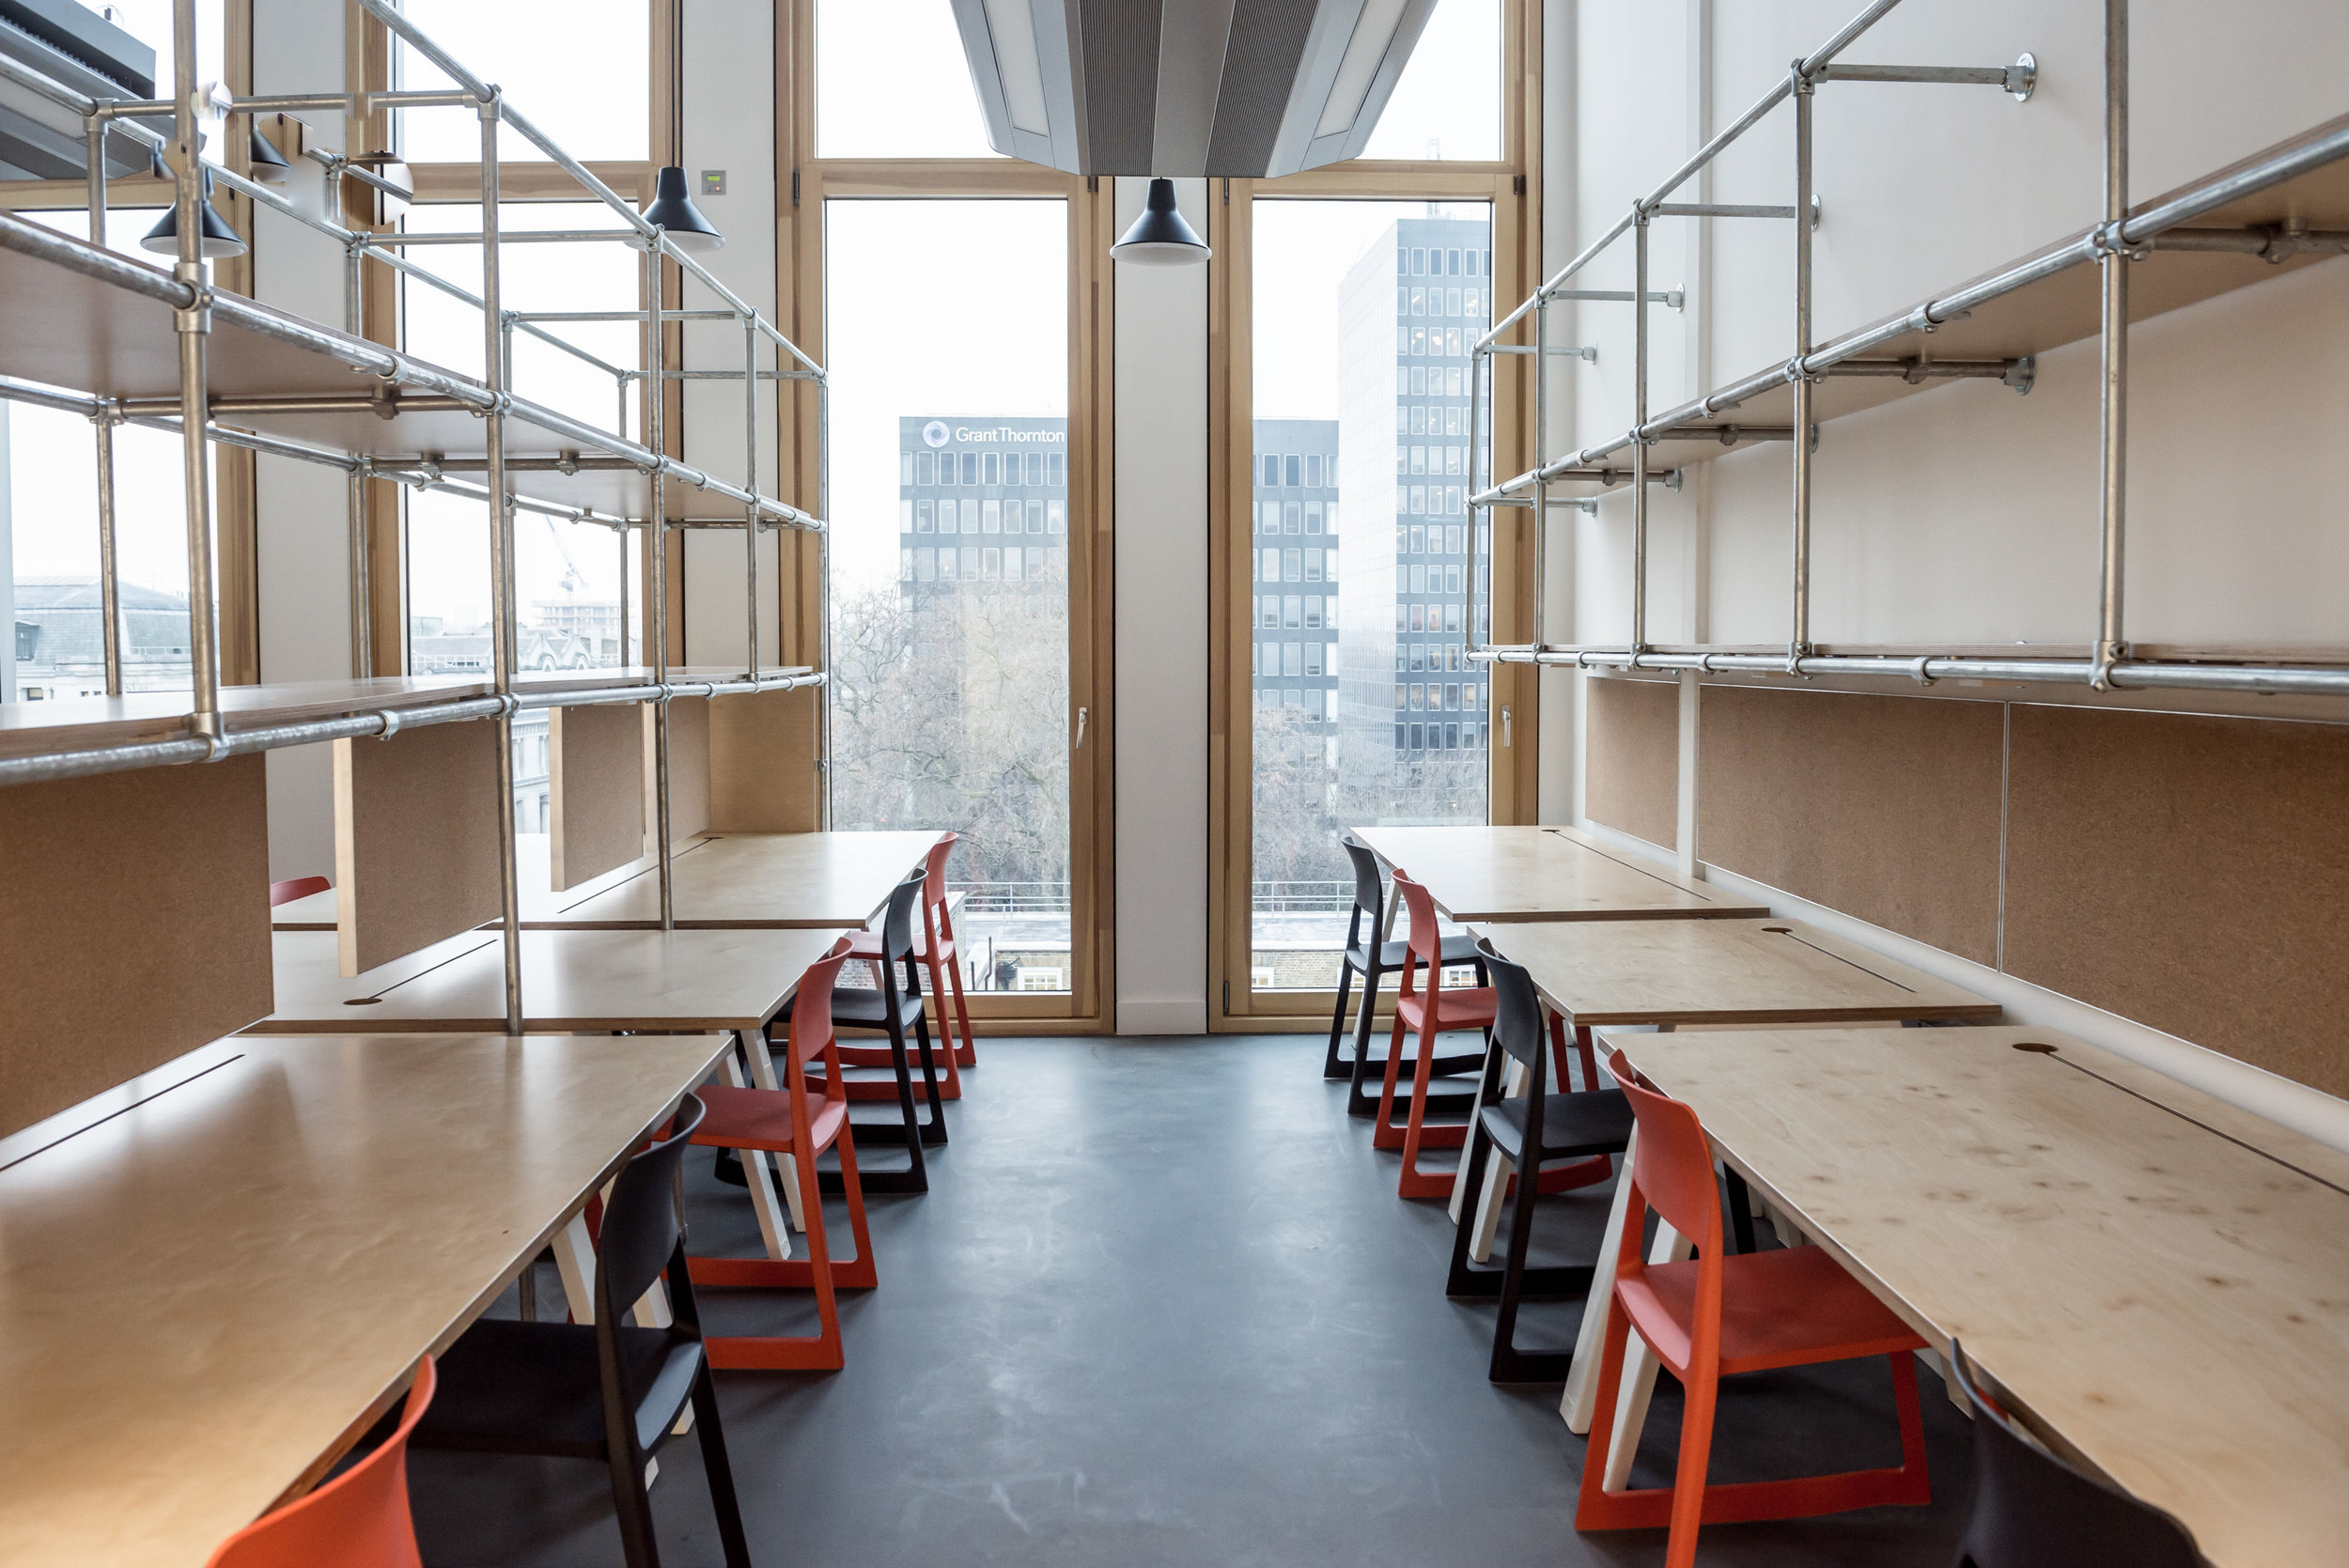  Student work spaces in  the refurbished Bartlett School of Architecture, 22 Gordon Street. London by Hawkins/Brown Architects 